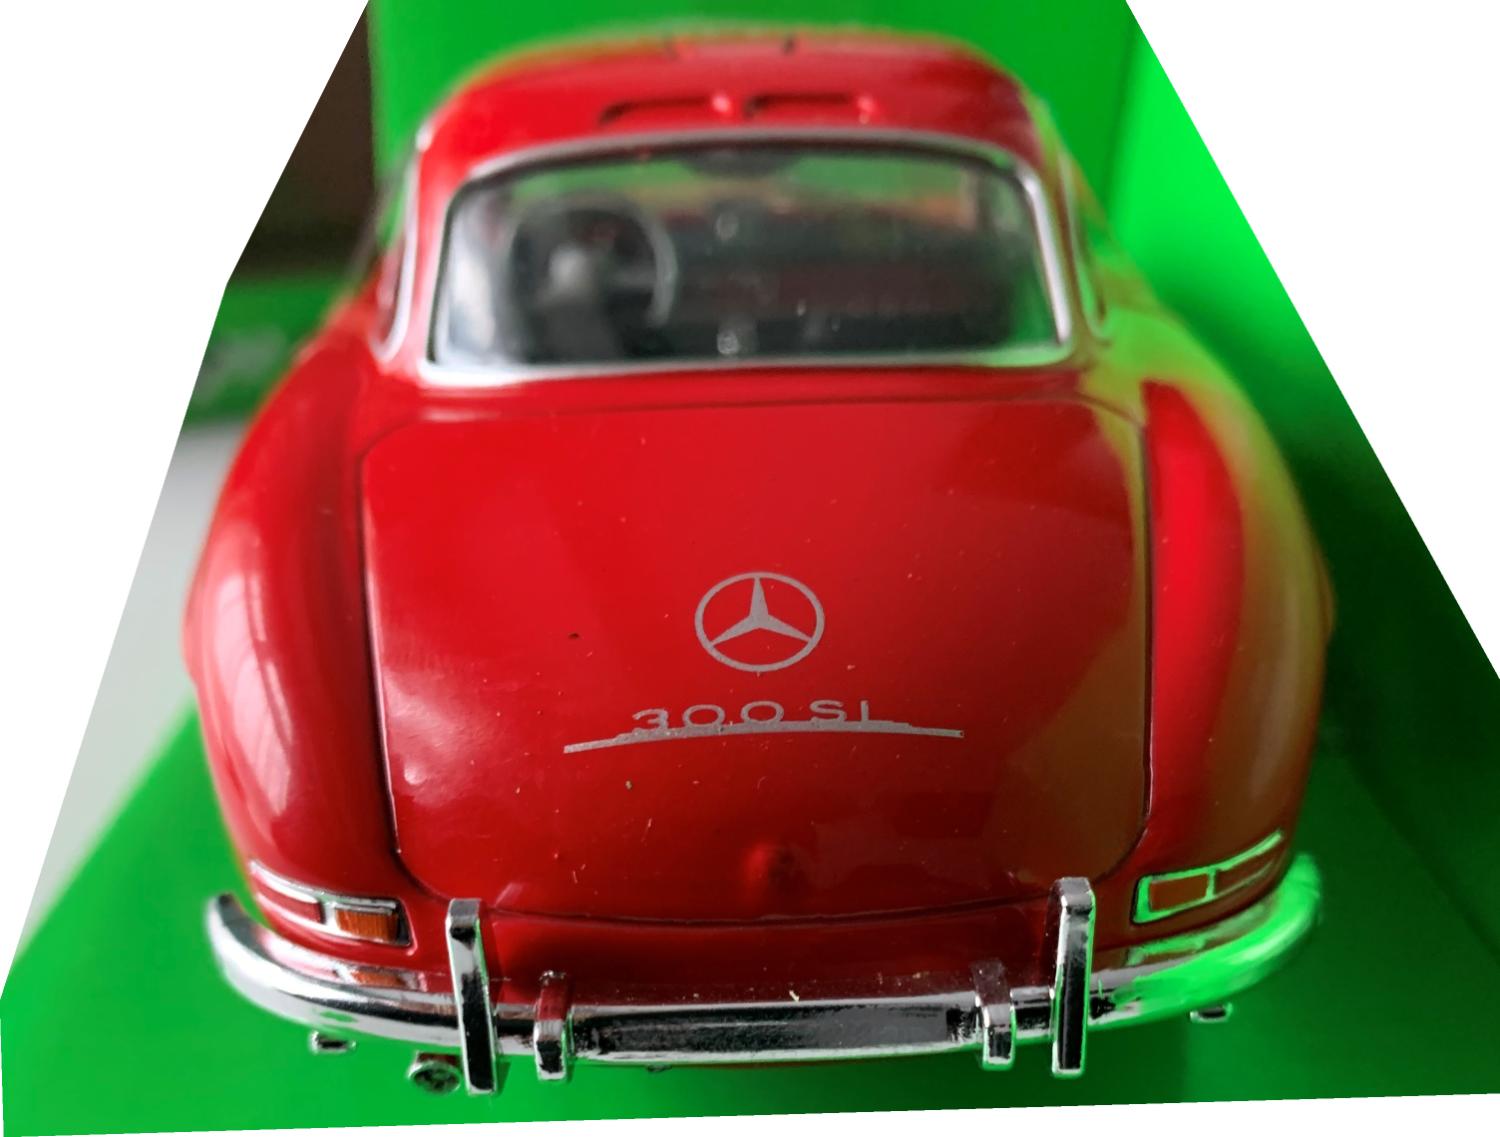 Mercedes Benz 300SL (W198) in red 1:24 scale model from Welly